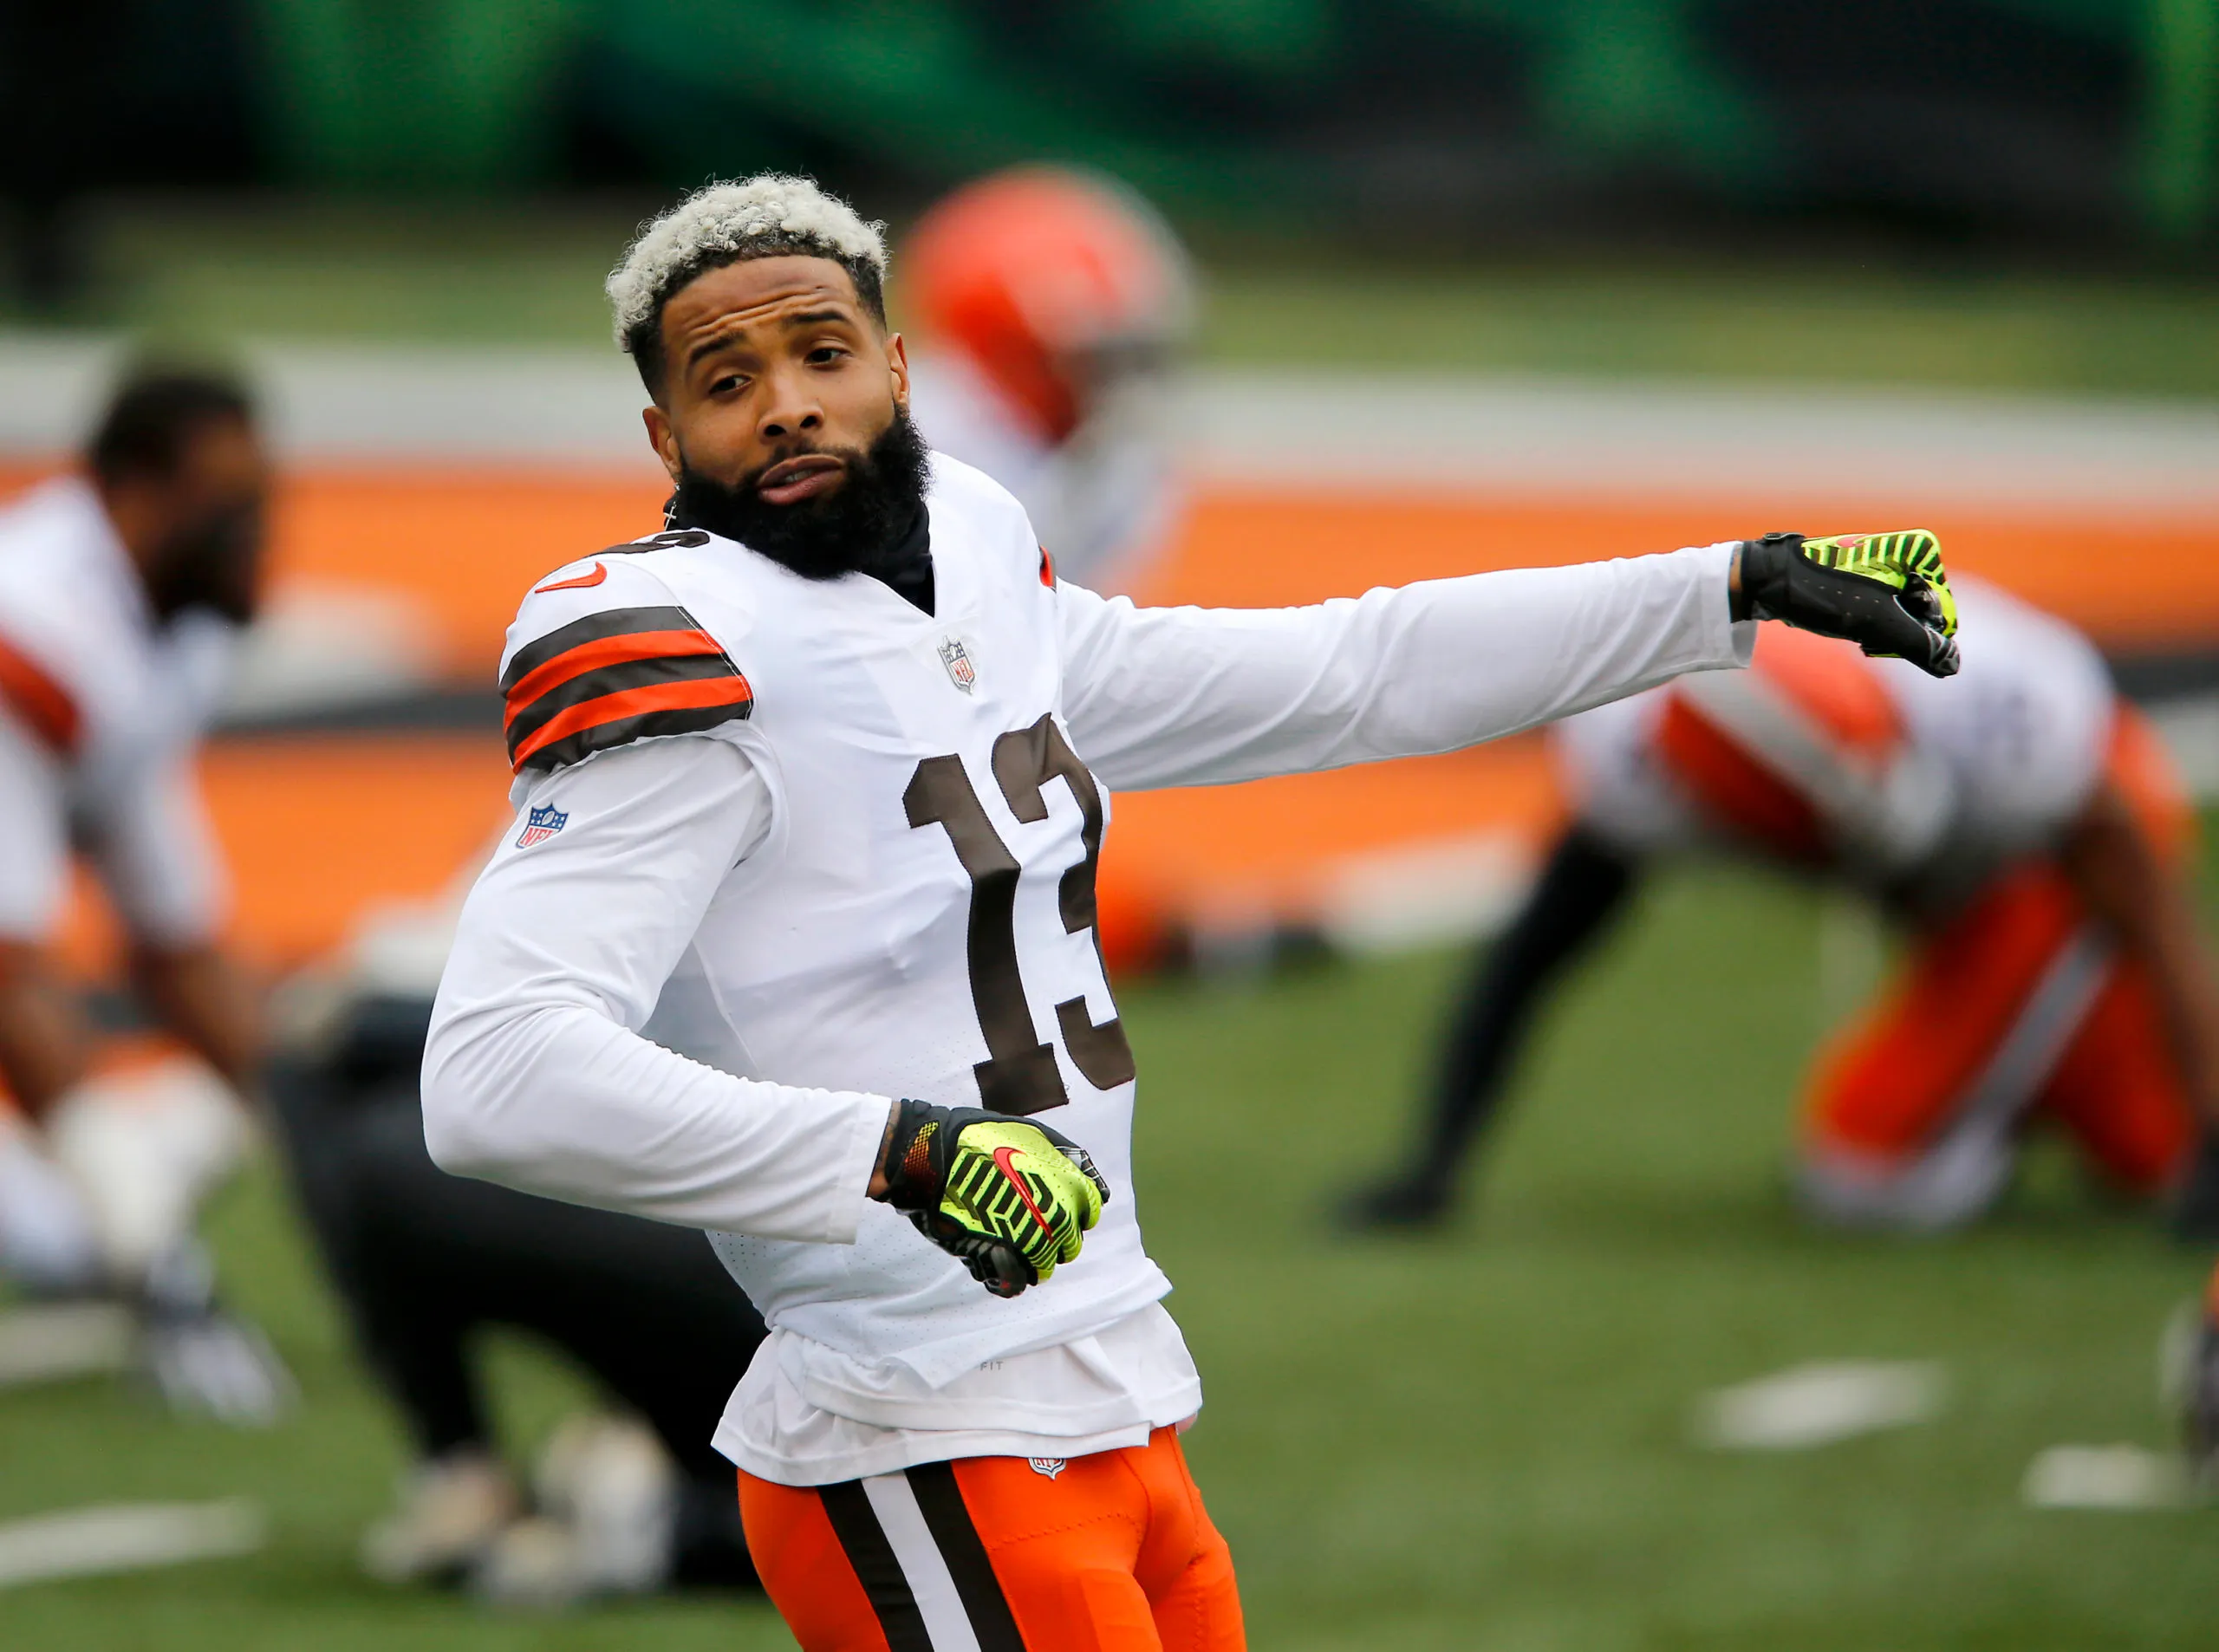 Oct 25, 2020; Cincinnati, Ohio, USA; Cleveland Browns wide receiver Odell Beckham Jr. (13) warms up before the game between the Cincinnati Bengals and the Cleveland Browns at Paul Brown Stadium. Mandatory Credit: Joseph Maiorana-USA TODAY Sports